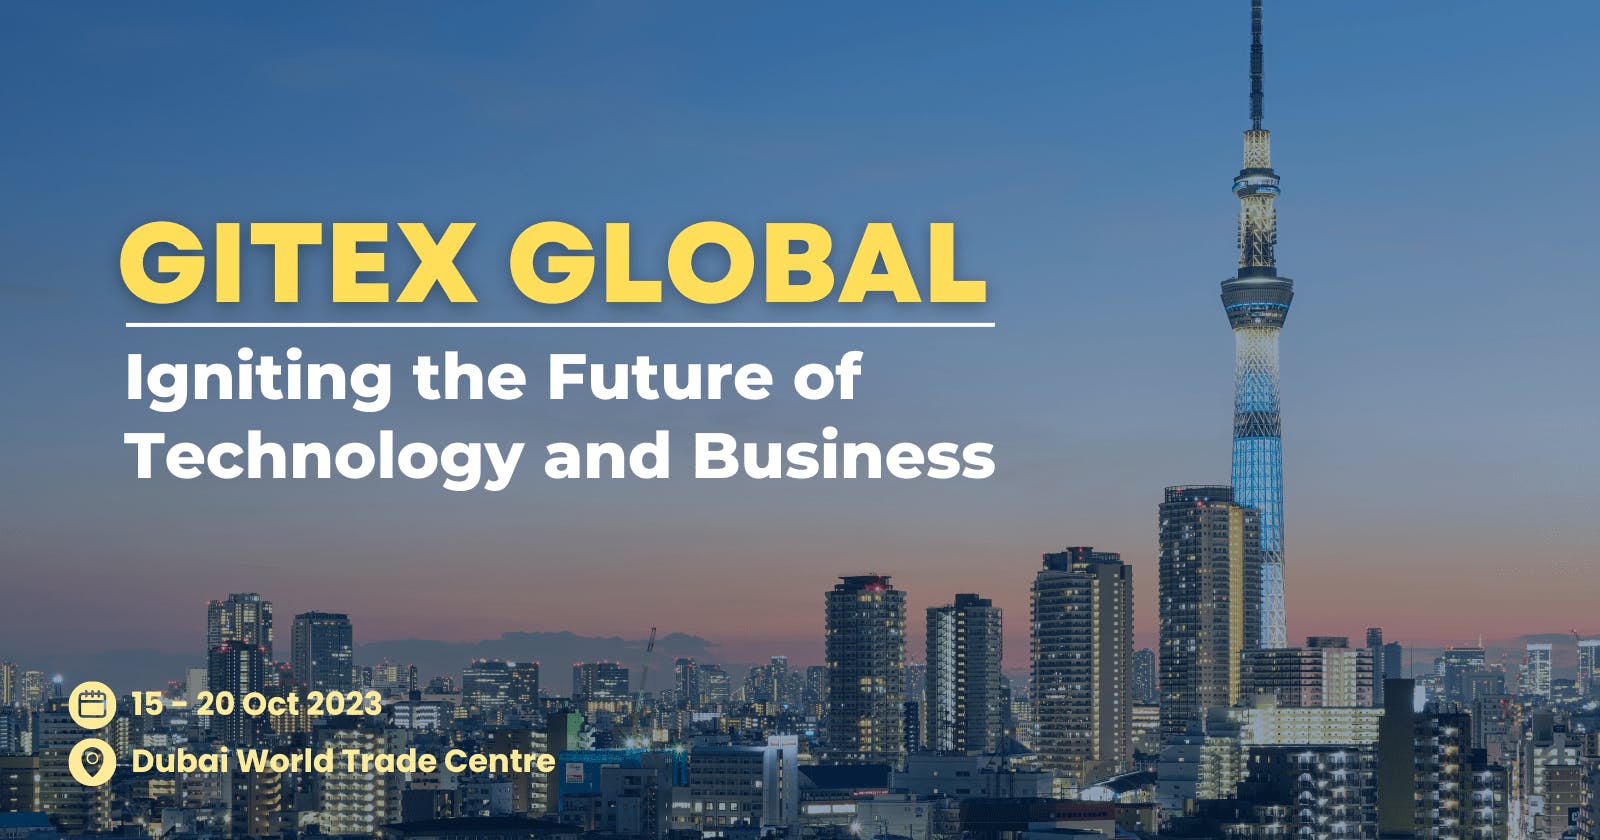 Gitex Global: Igniting the Future of Technology and Business